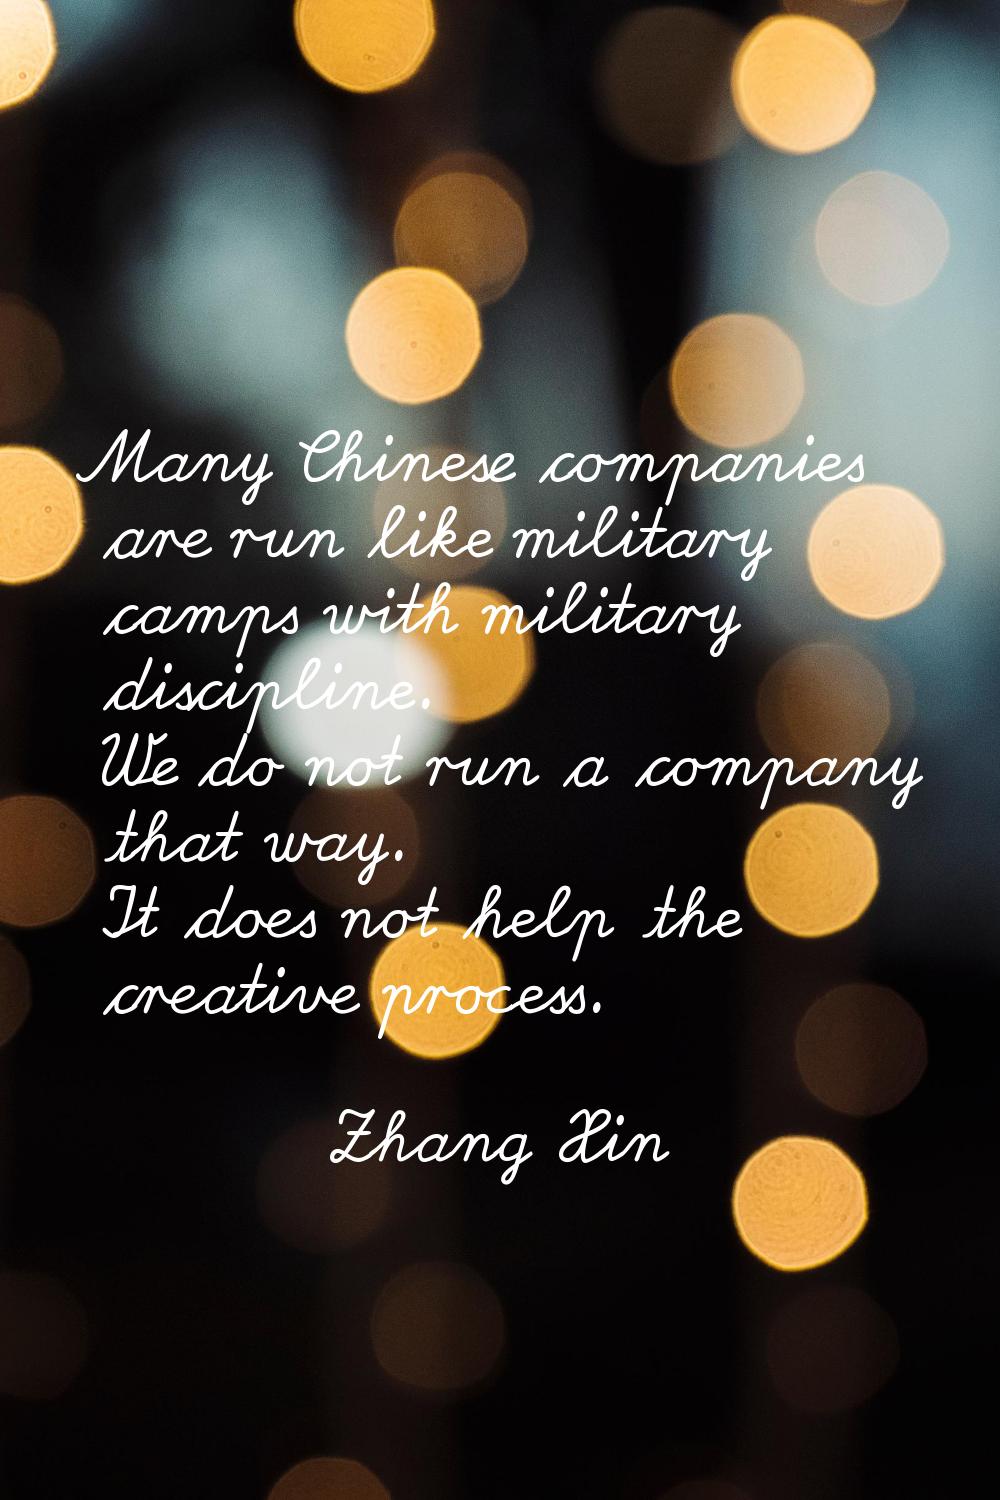 Many Chinese companies are run like military camps with military discipline. We do not run a compan